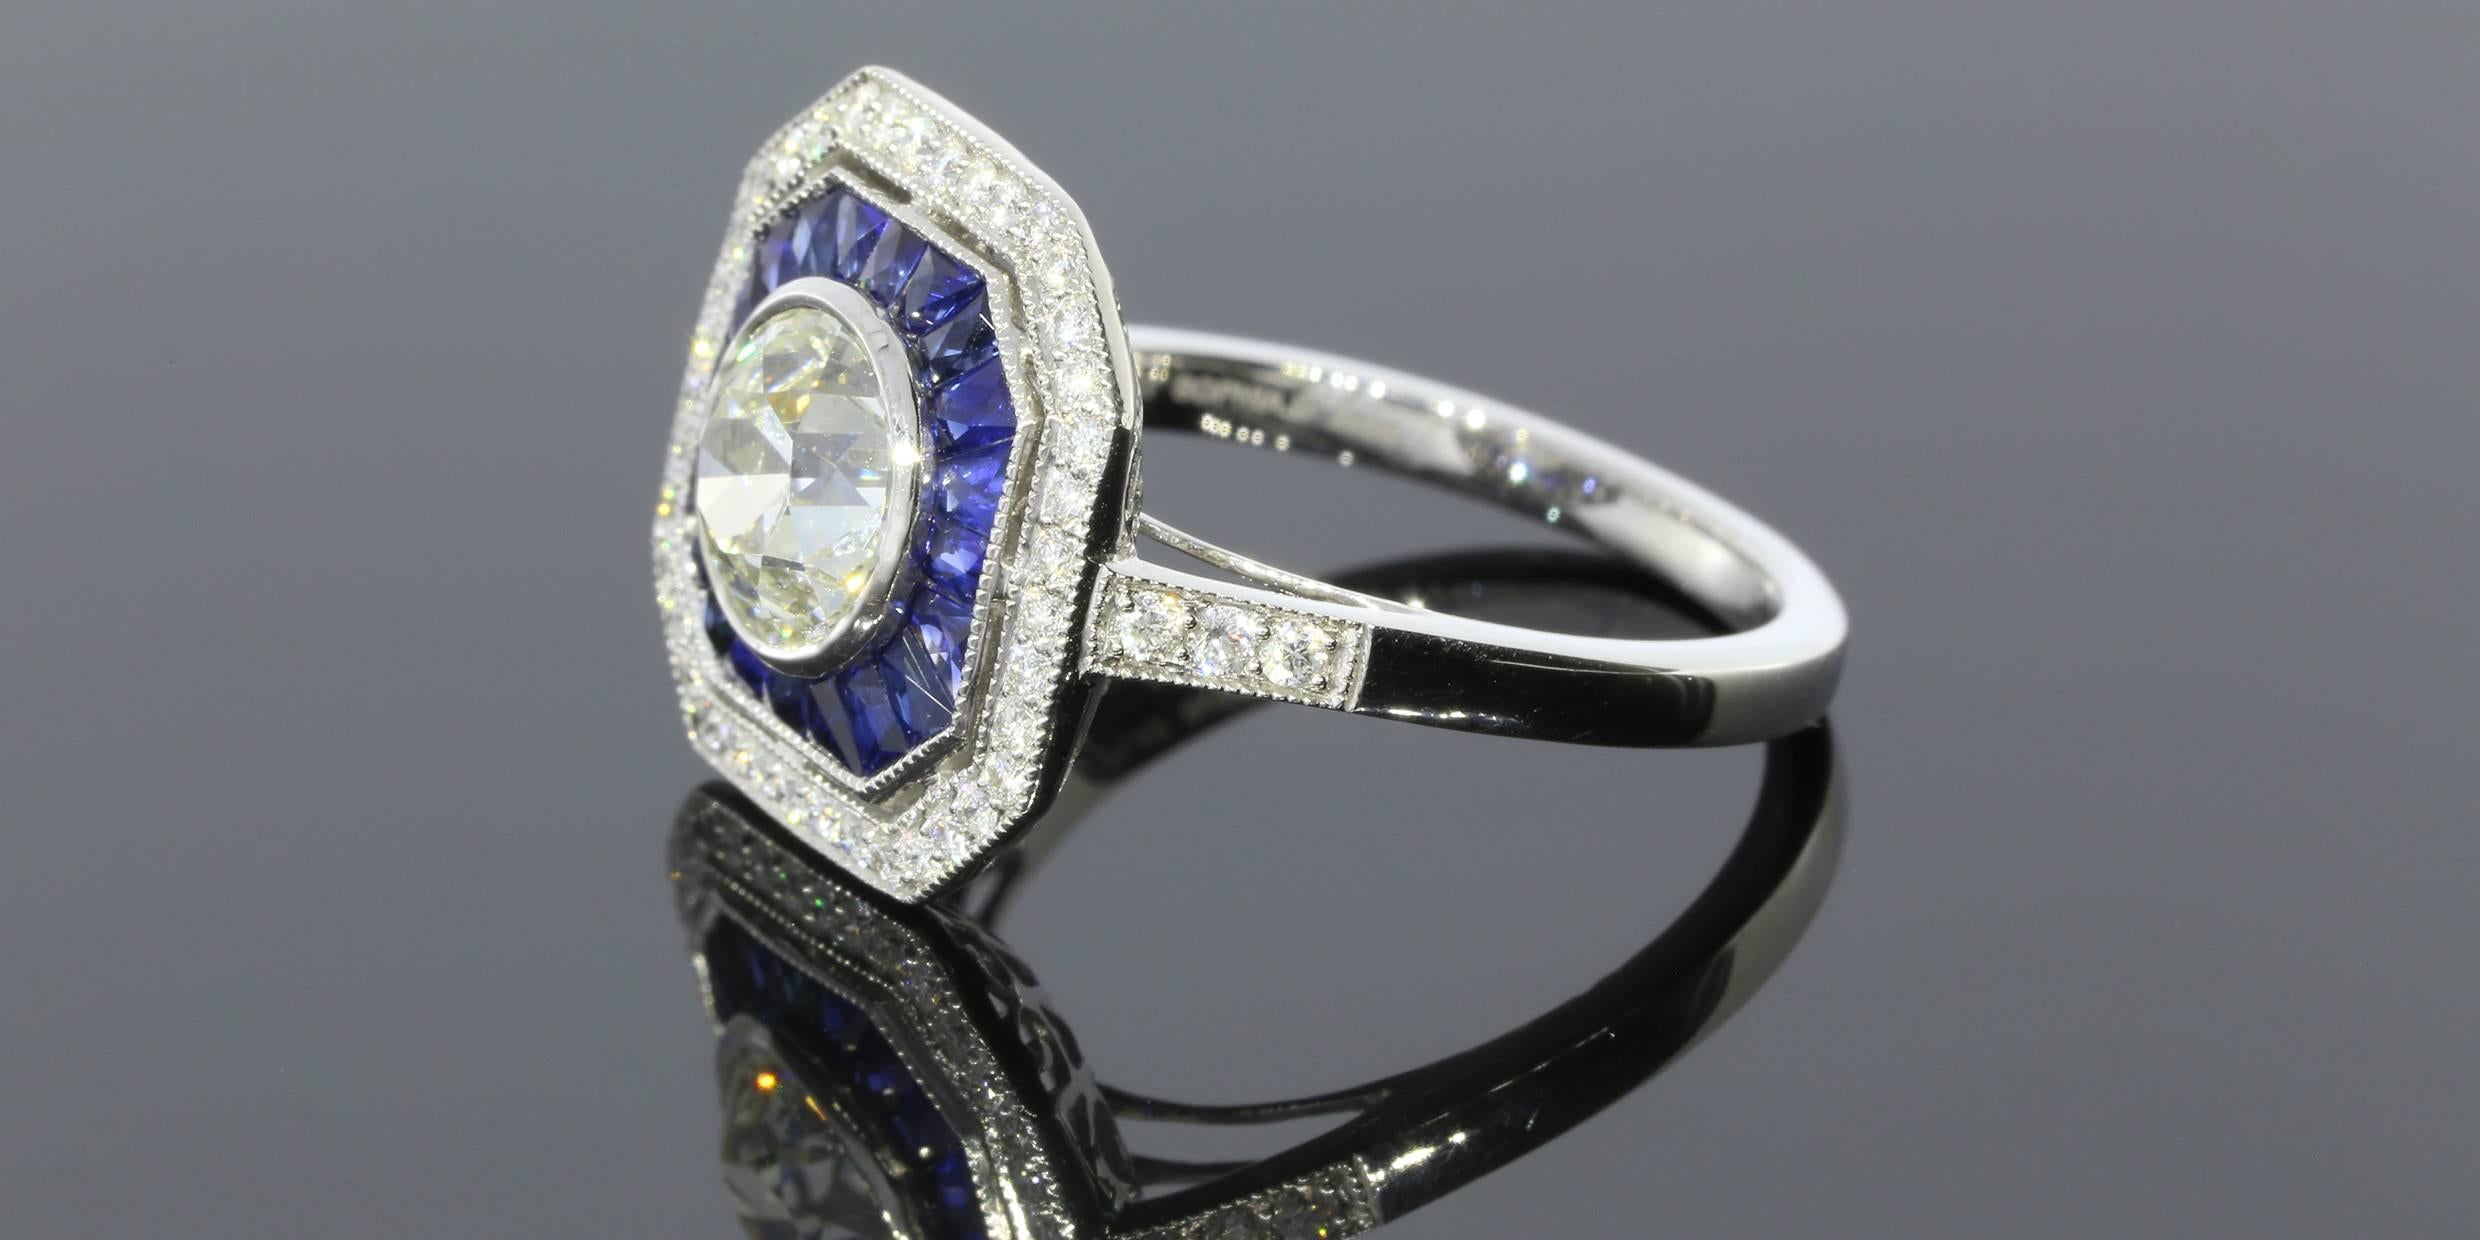 This mesmerizing ring features one Old European cut center diamond weighing 1.43 carats. The diamond is graded as K/VS1 and is bezel set. The ring also features 0.29CTW round brilliant cut diamonds and 0.75CTW of natural blue sapphires that were